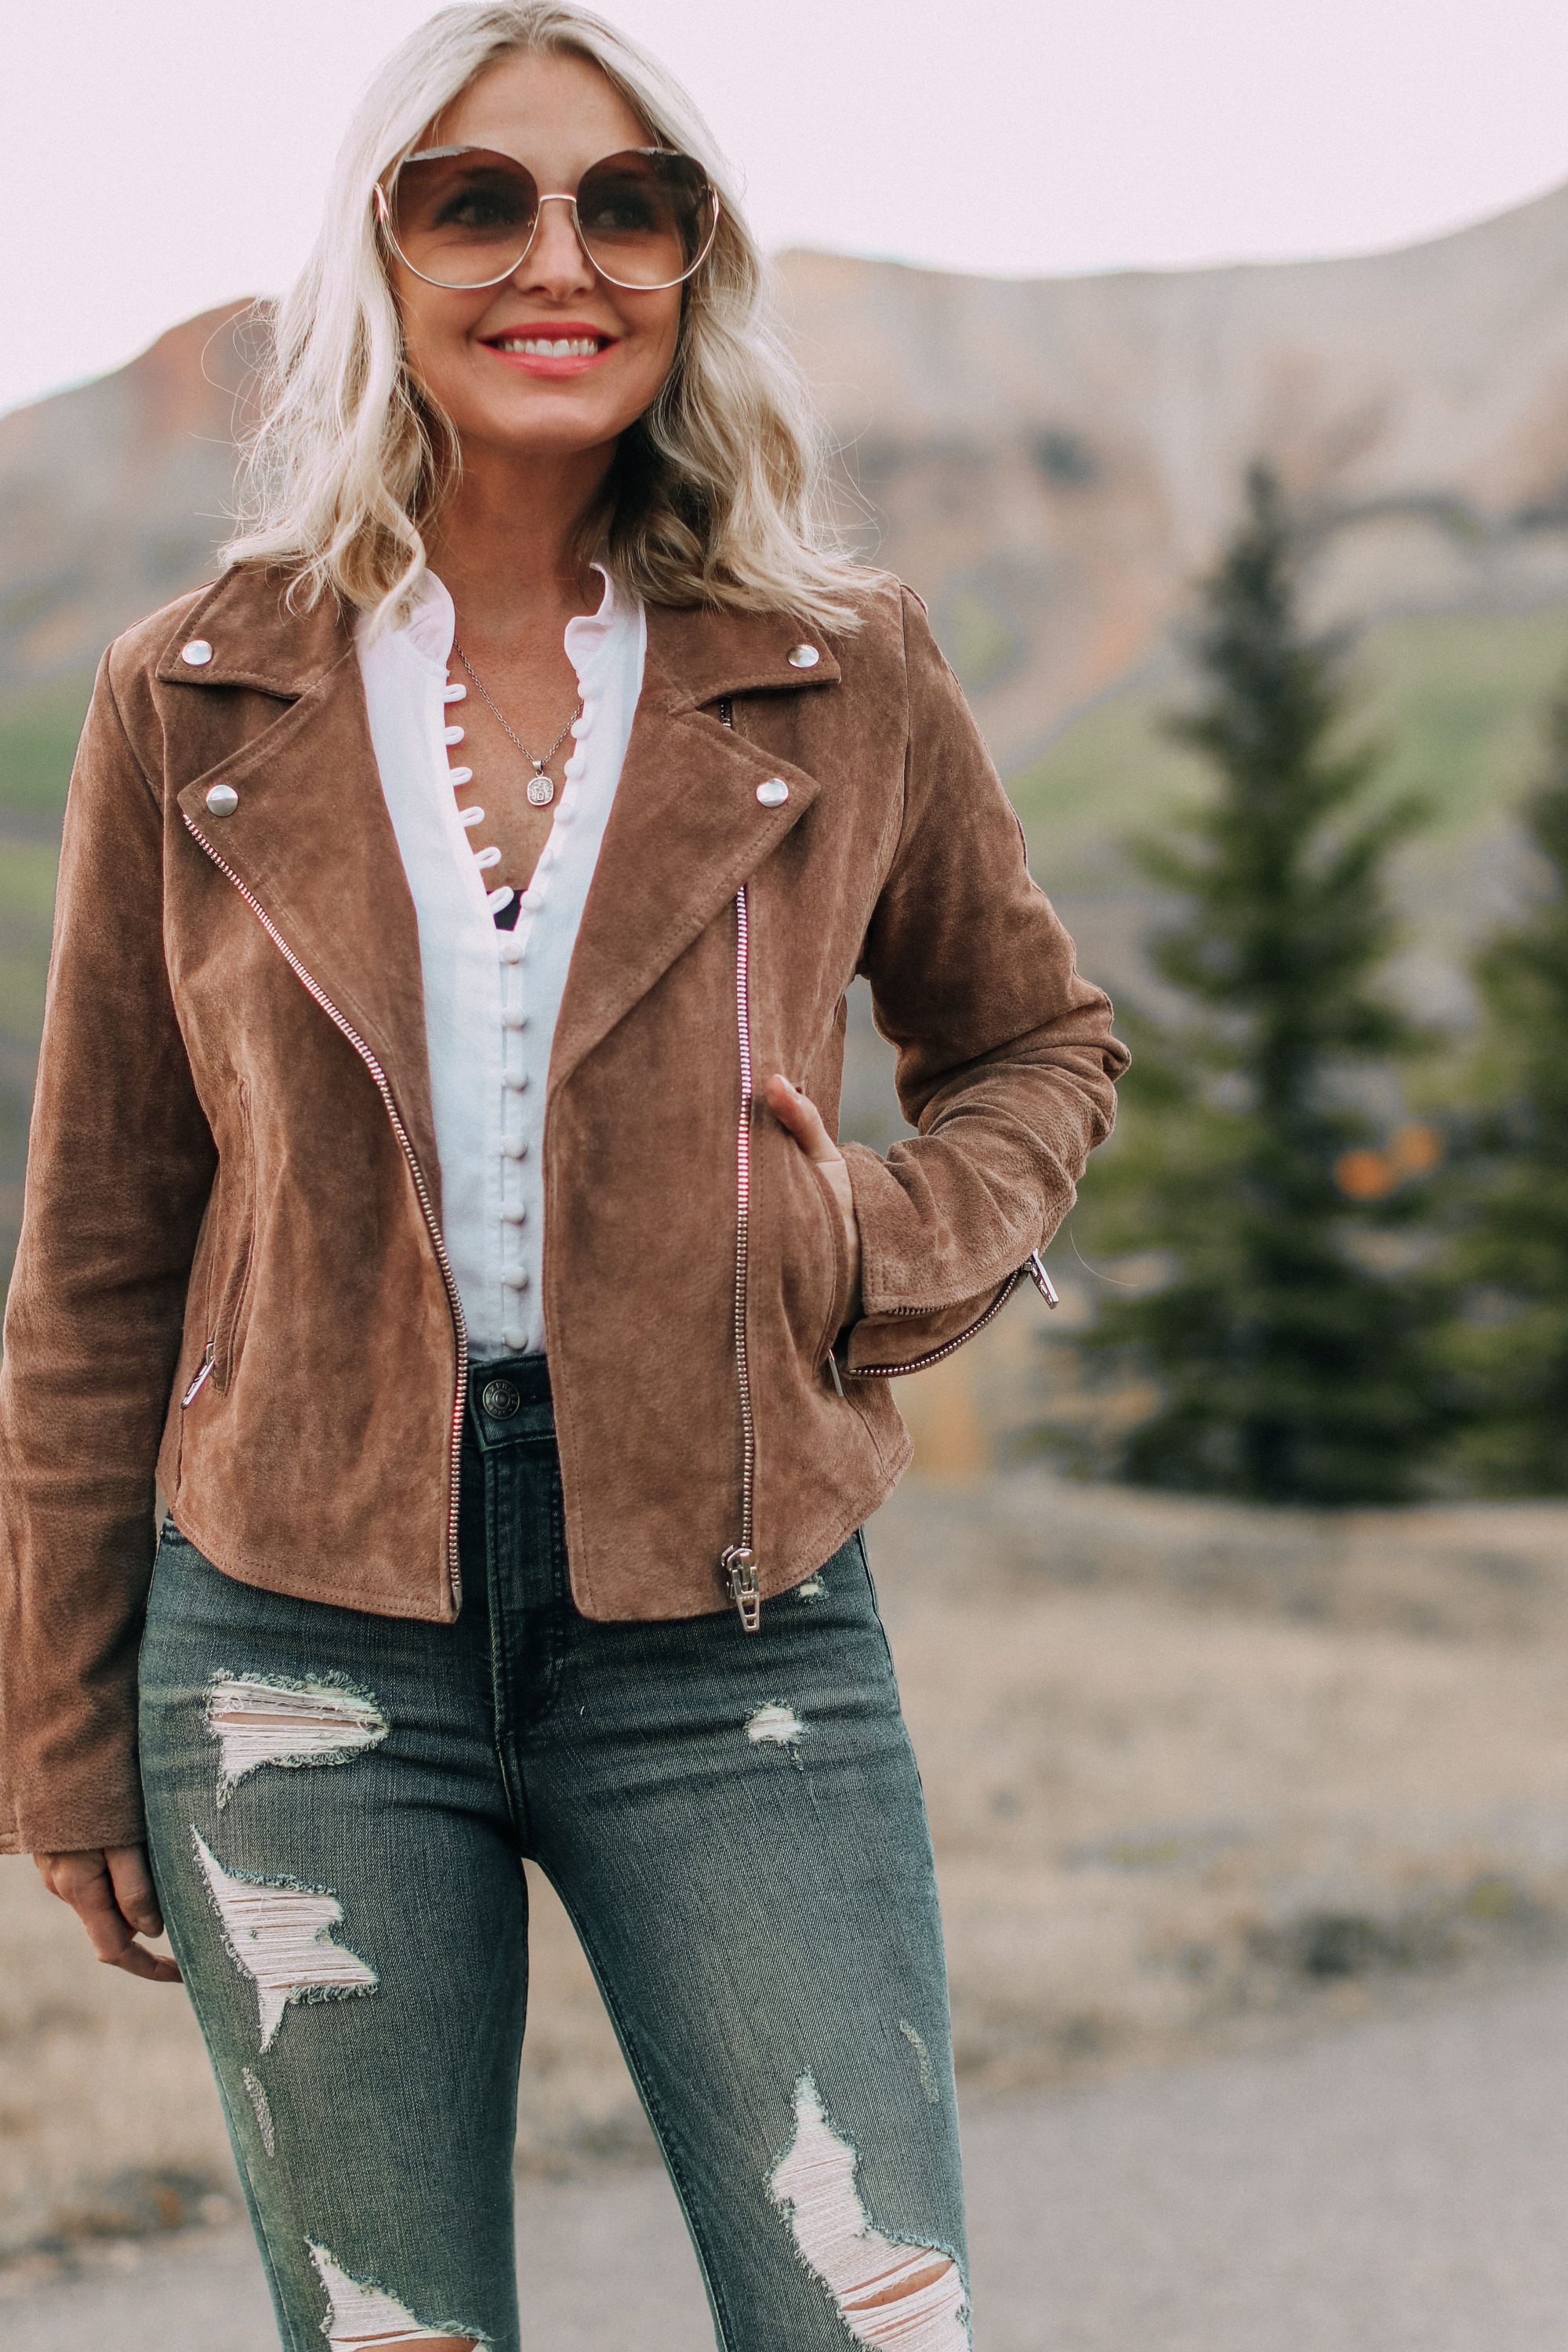 Blank NYC next level moto jacket on fashion blogger Erin Busbee of Busbee Style paired with Express white blouse and distressed jeans with beige Vince Camuto booties and Chloe sunglasses in Telluride, Colorado